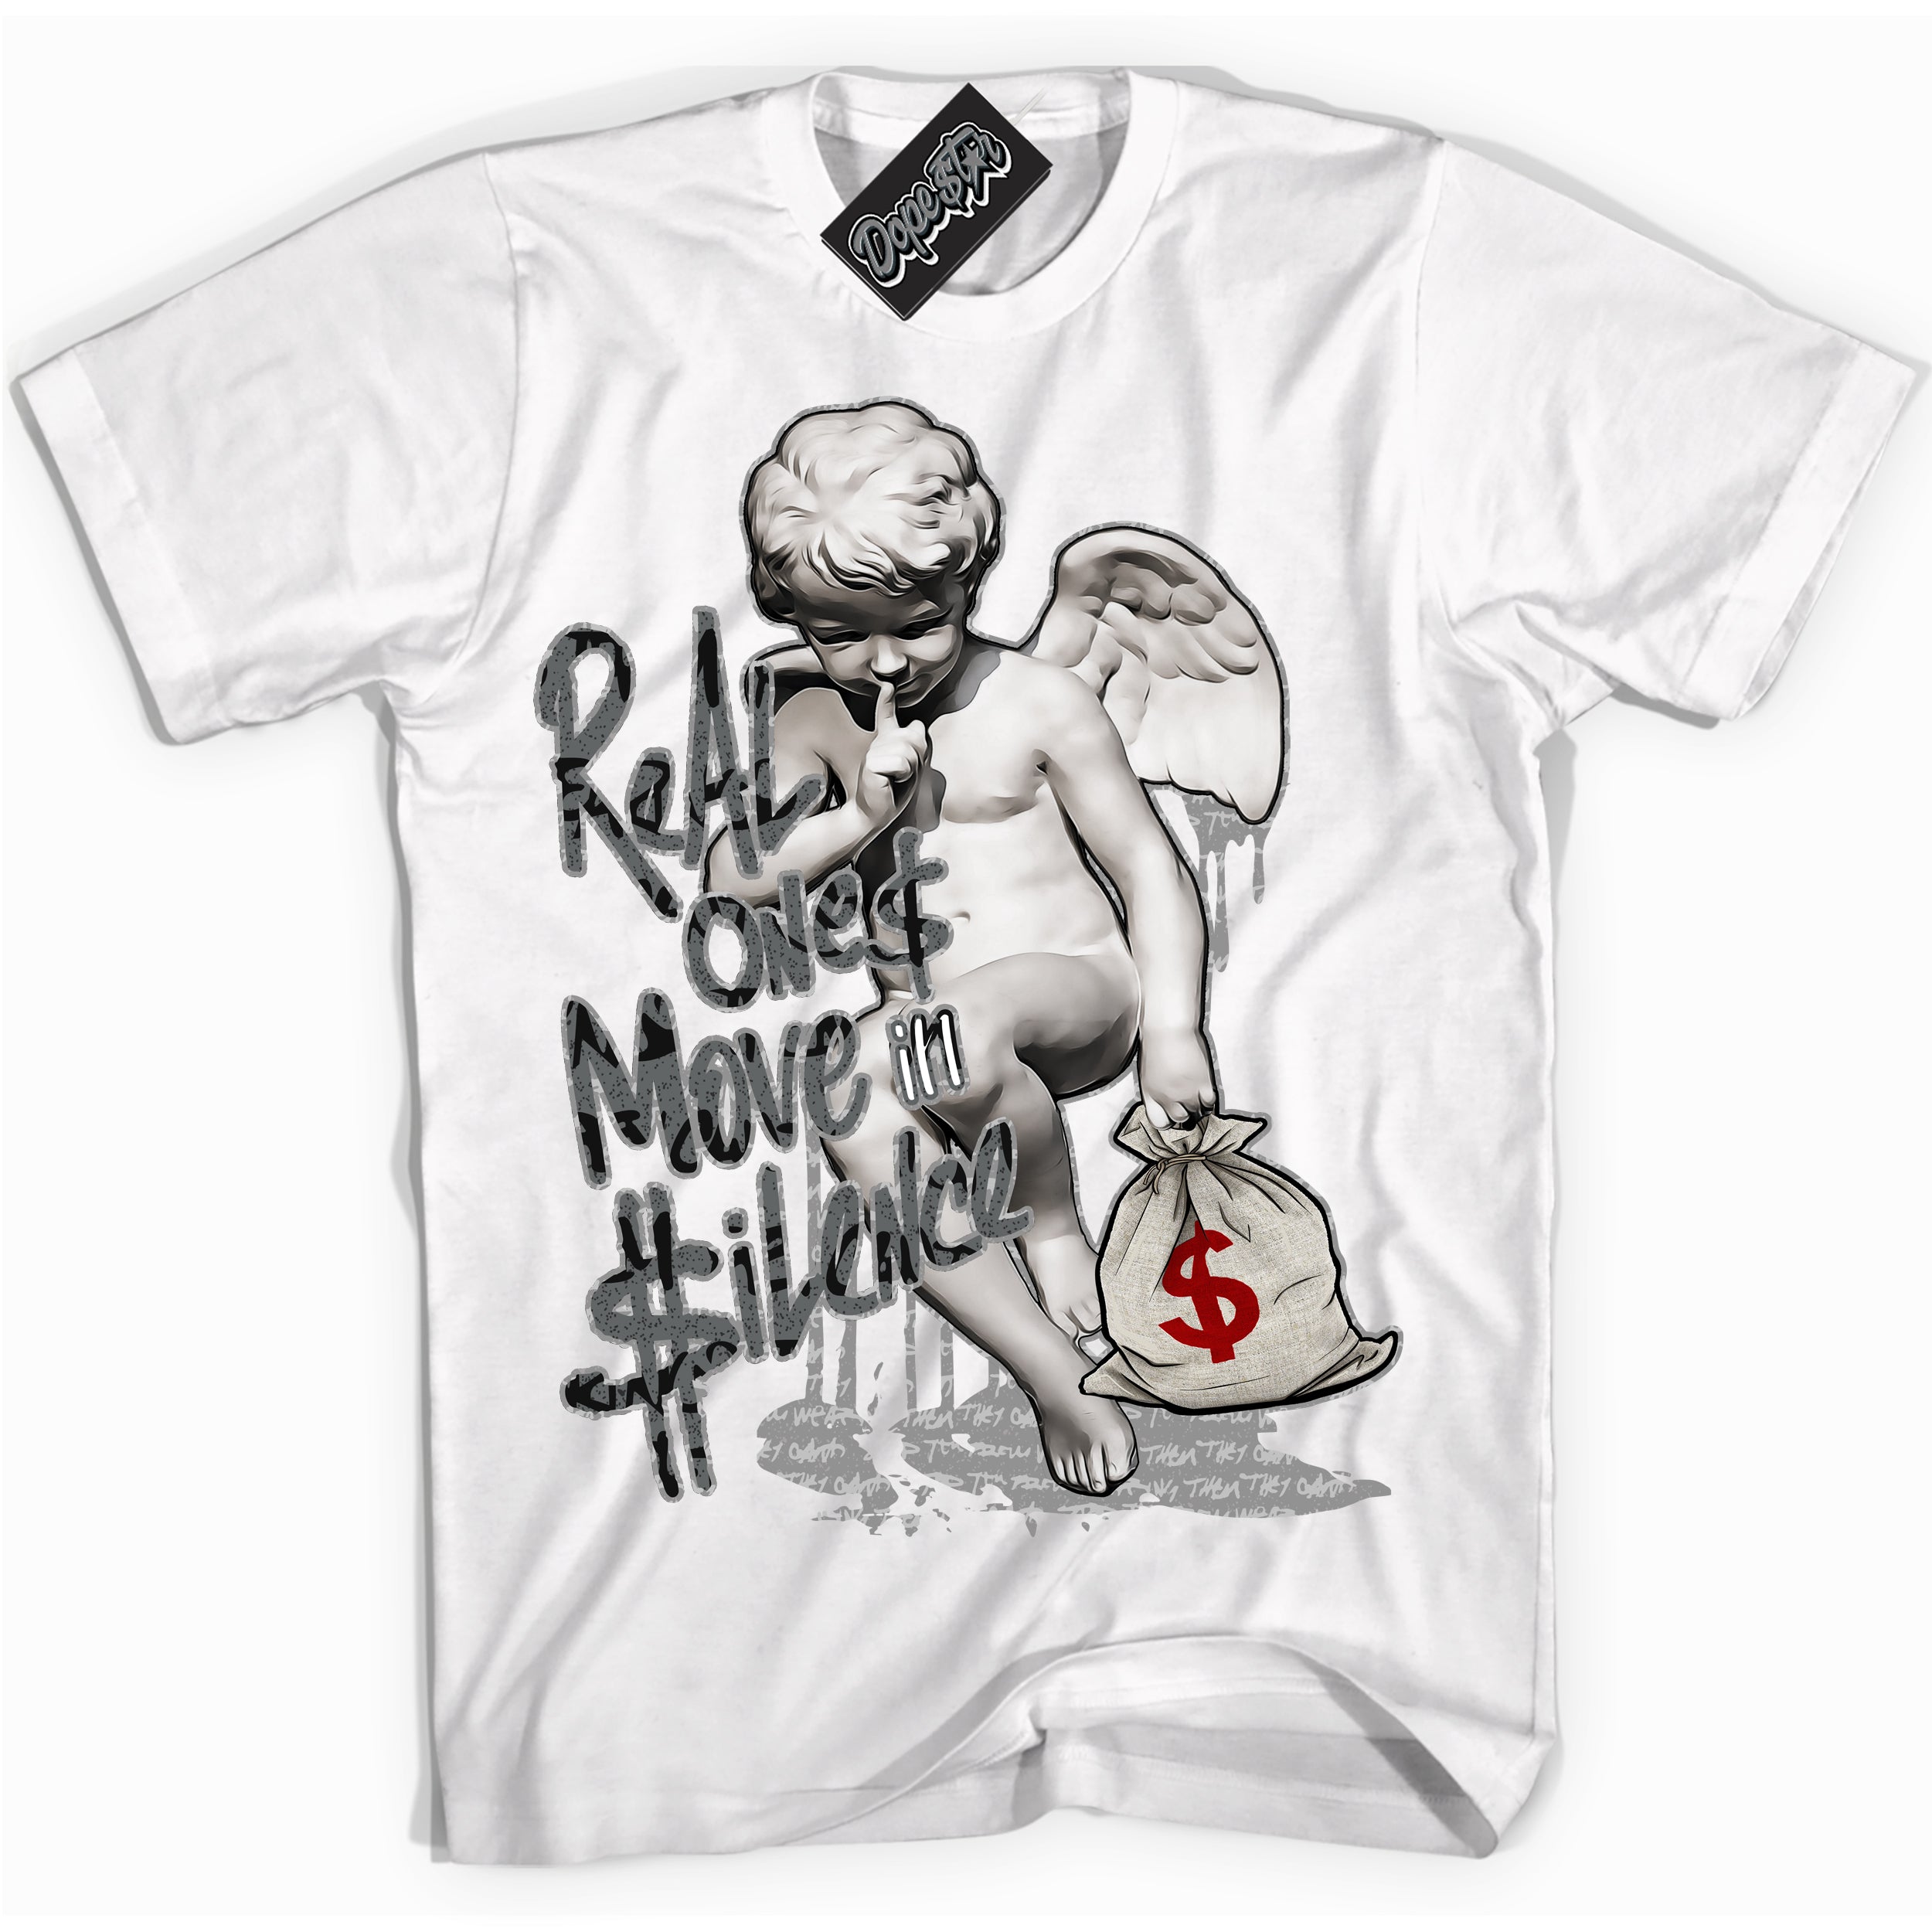 Cool White Shirt with “ Real Ones Cherub ” design that perfectly matches Rebellionaire 1s Sneakers.